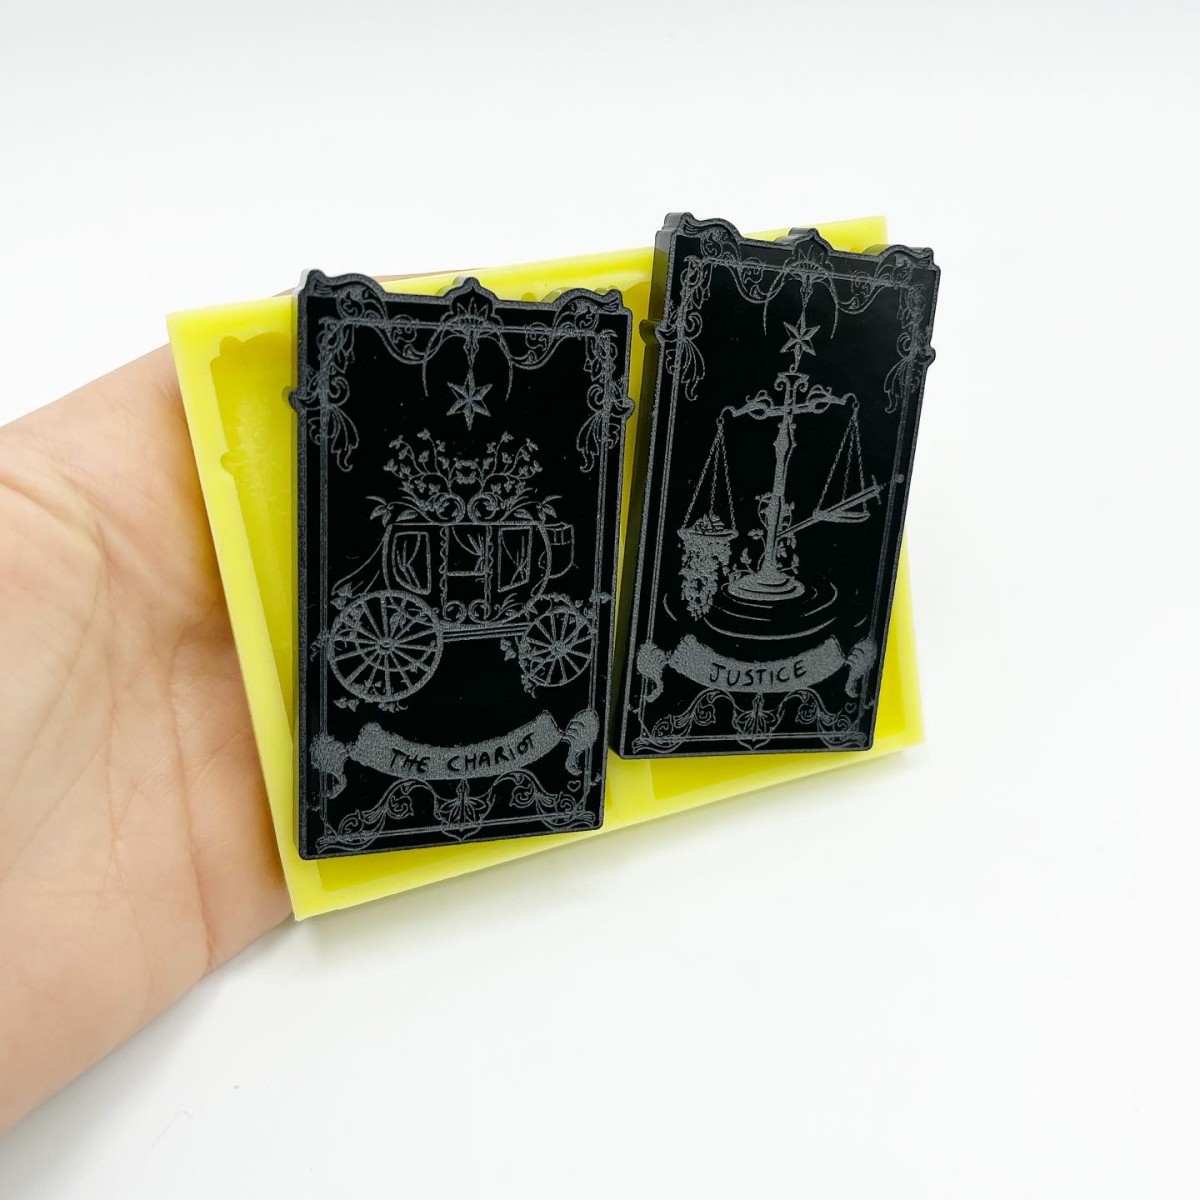 Set of "Justice" and "The Chariot" Tarot Cards Mold - medium size